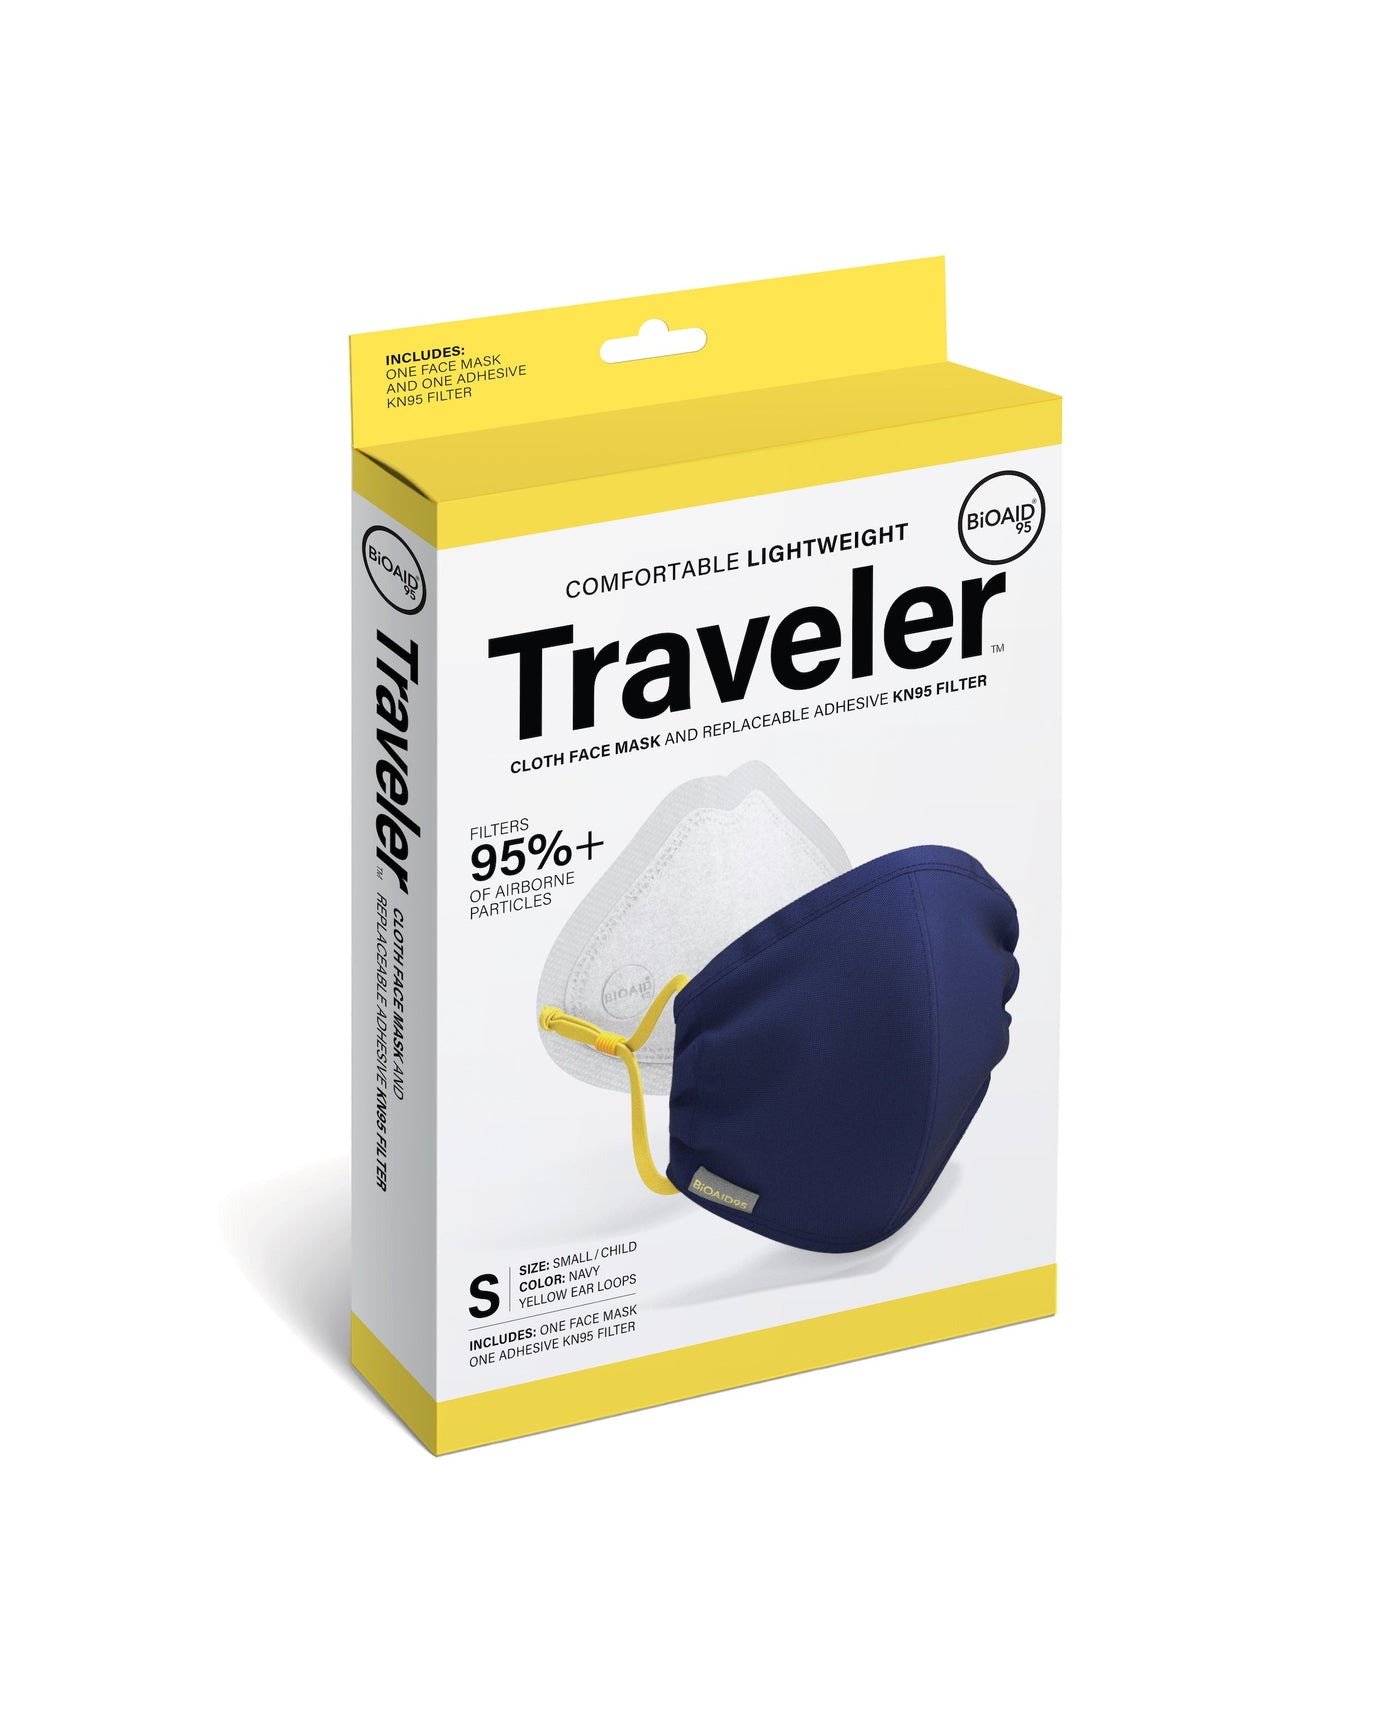 Traveler Mask + Replaceable Adhesive KN95 Filter - Small / Child